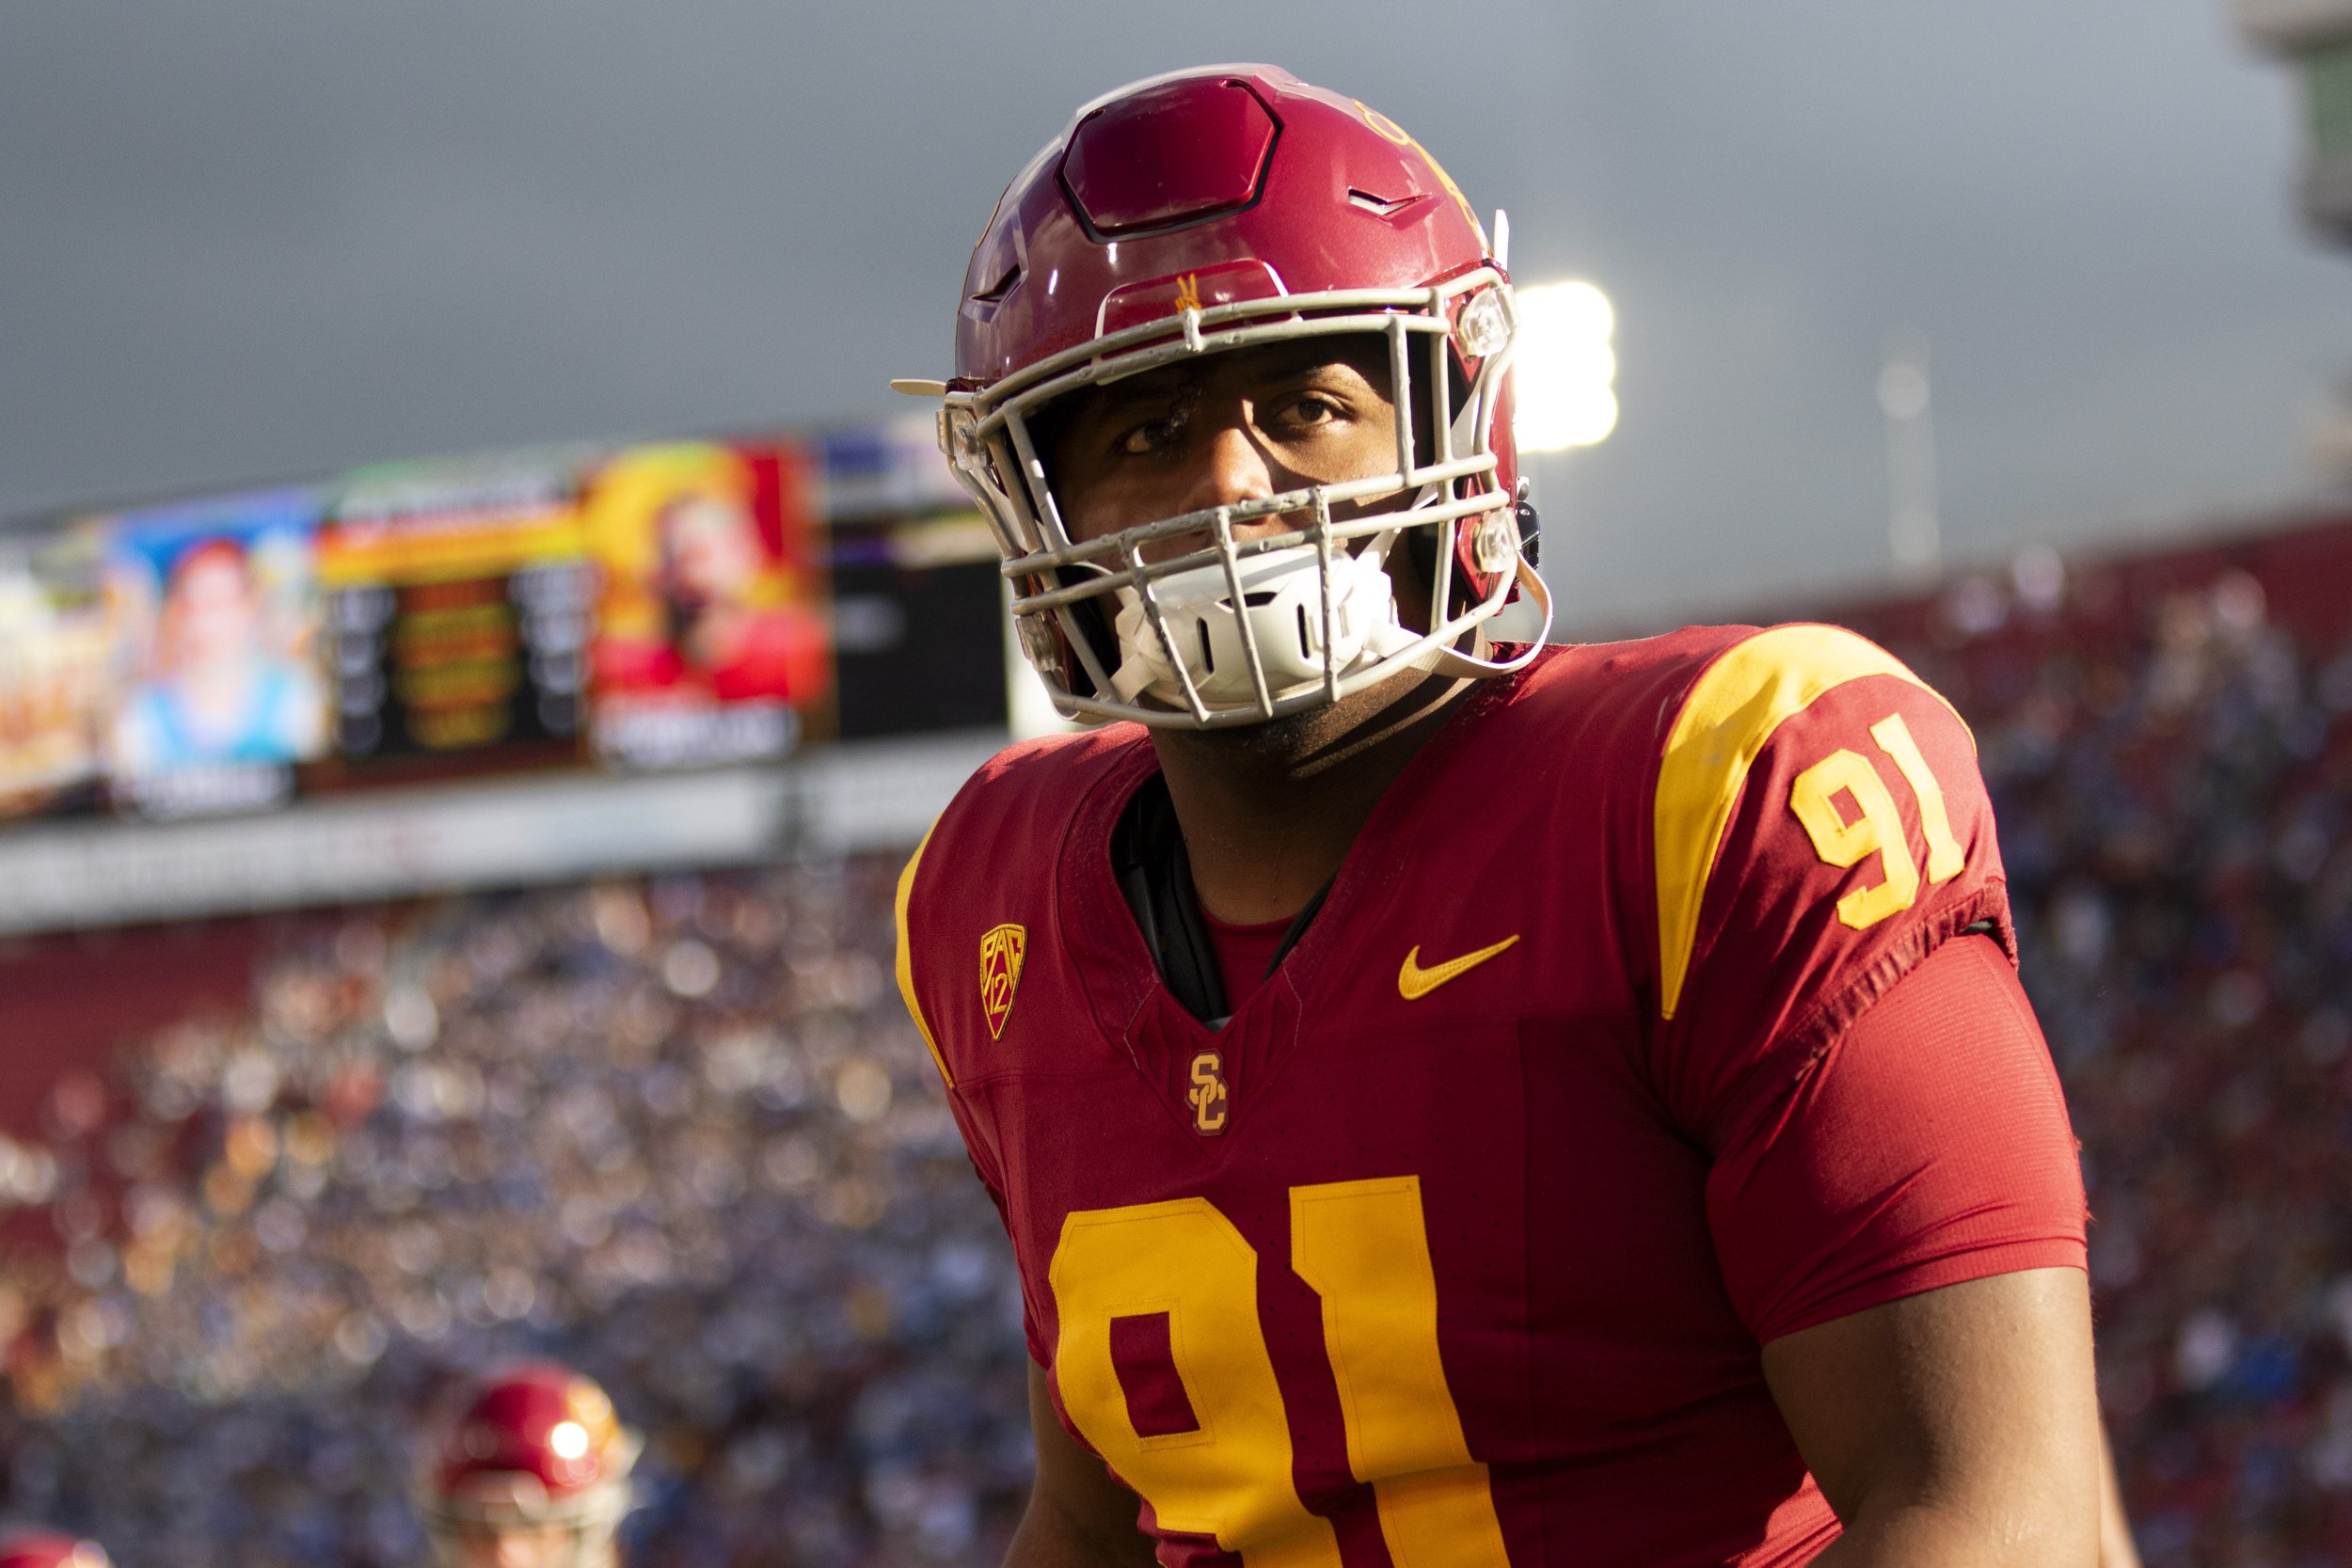  University of Southern California (USC) Trojan defensive lineman Deijon Laffitte practicing during half-time of a football game against the University of California, Los Angeles Bruins at the Los Angeles Memorial Coliseum, in Los Angeles, Calif., on